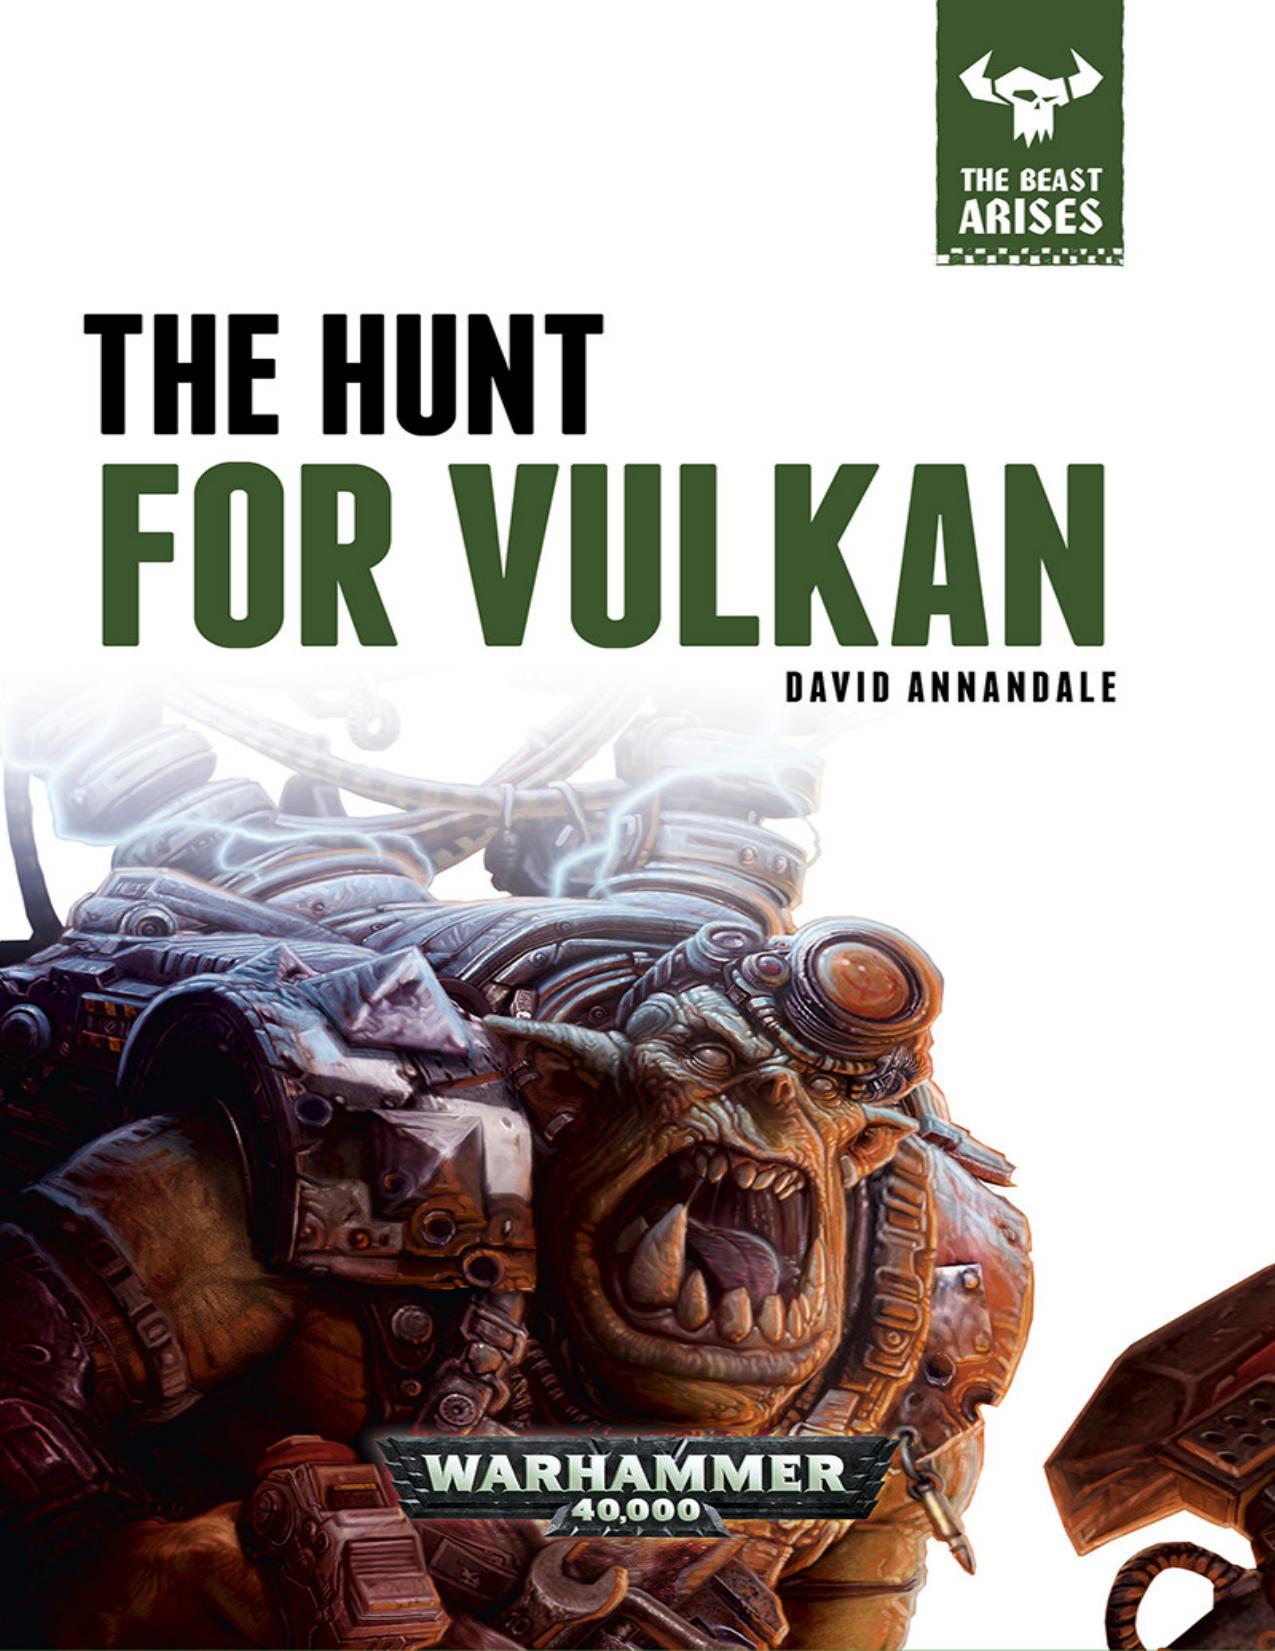 The Hunt for Vulkan by David Annandale